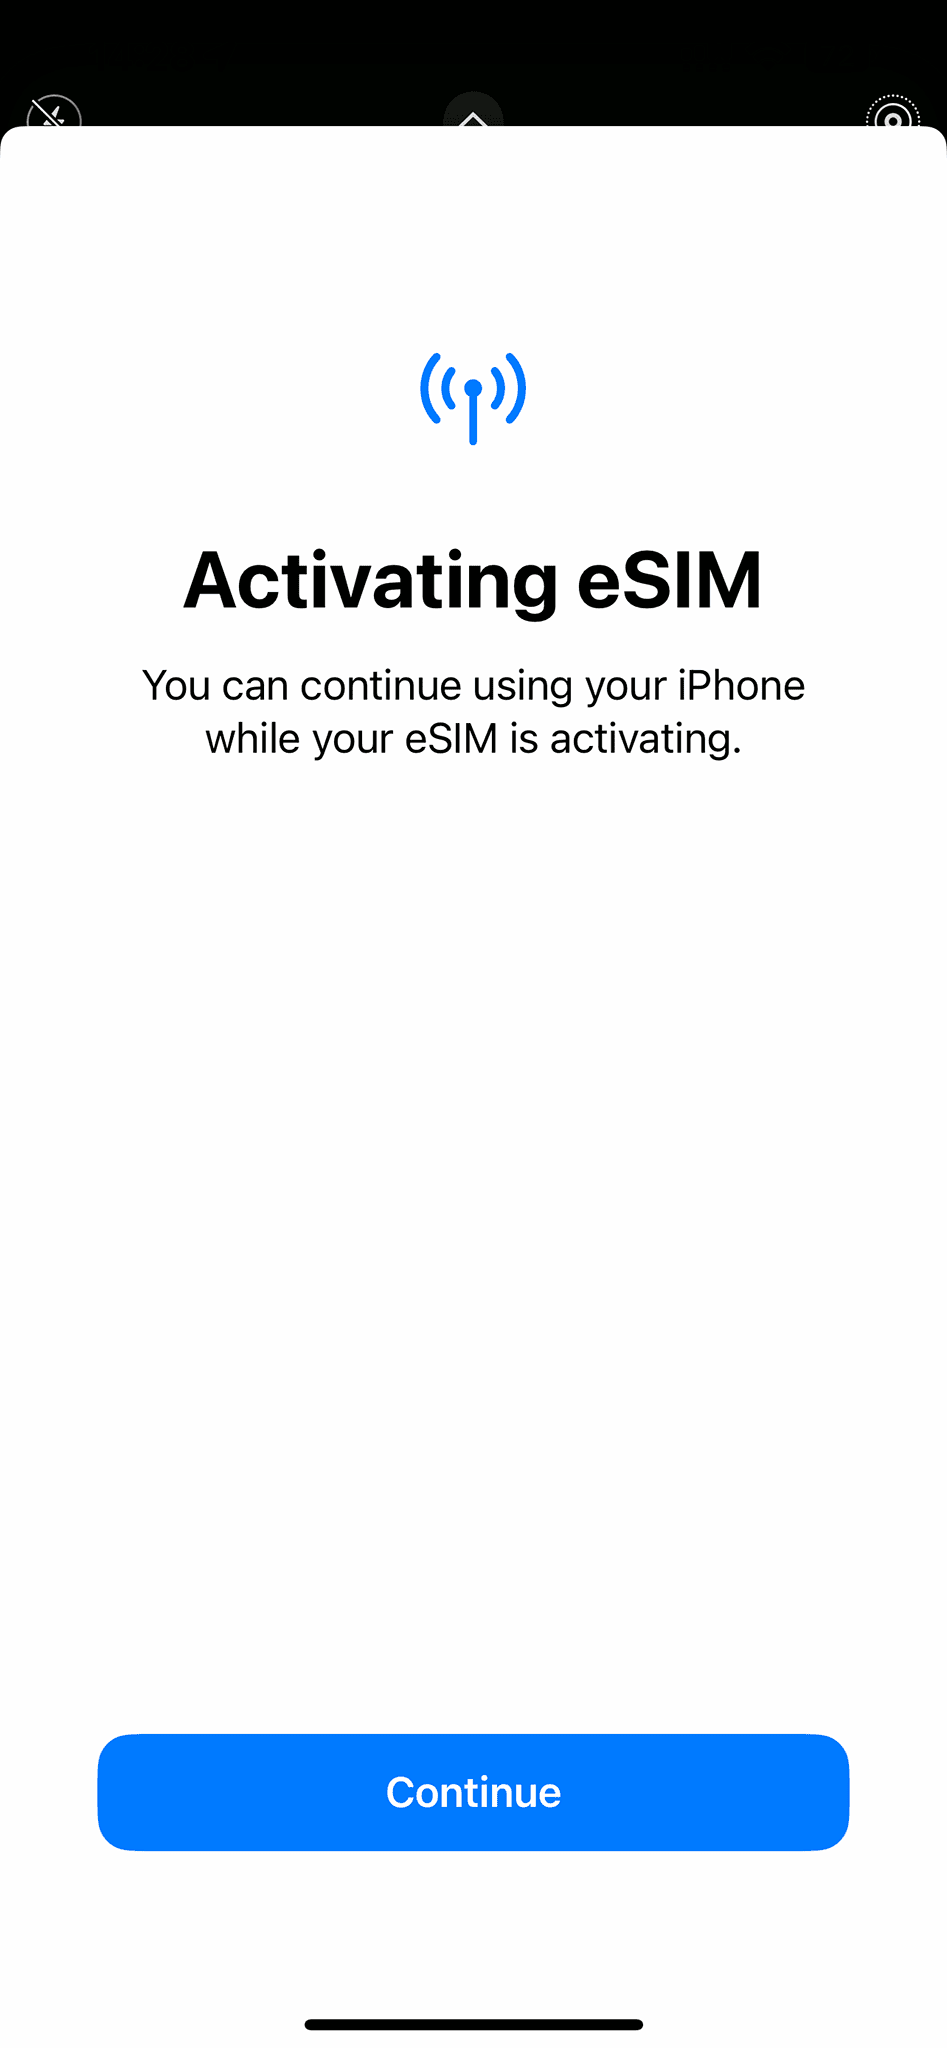 Activation of eSIM on LycaMobile been completed